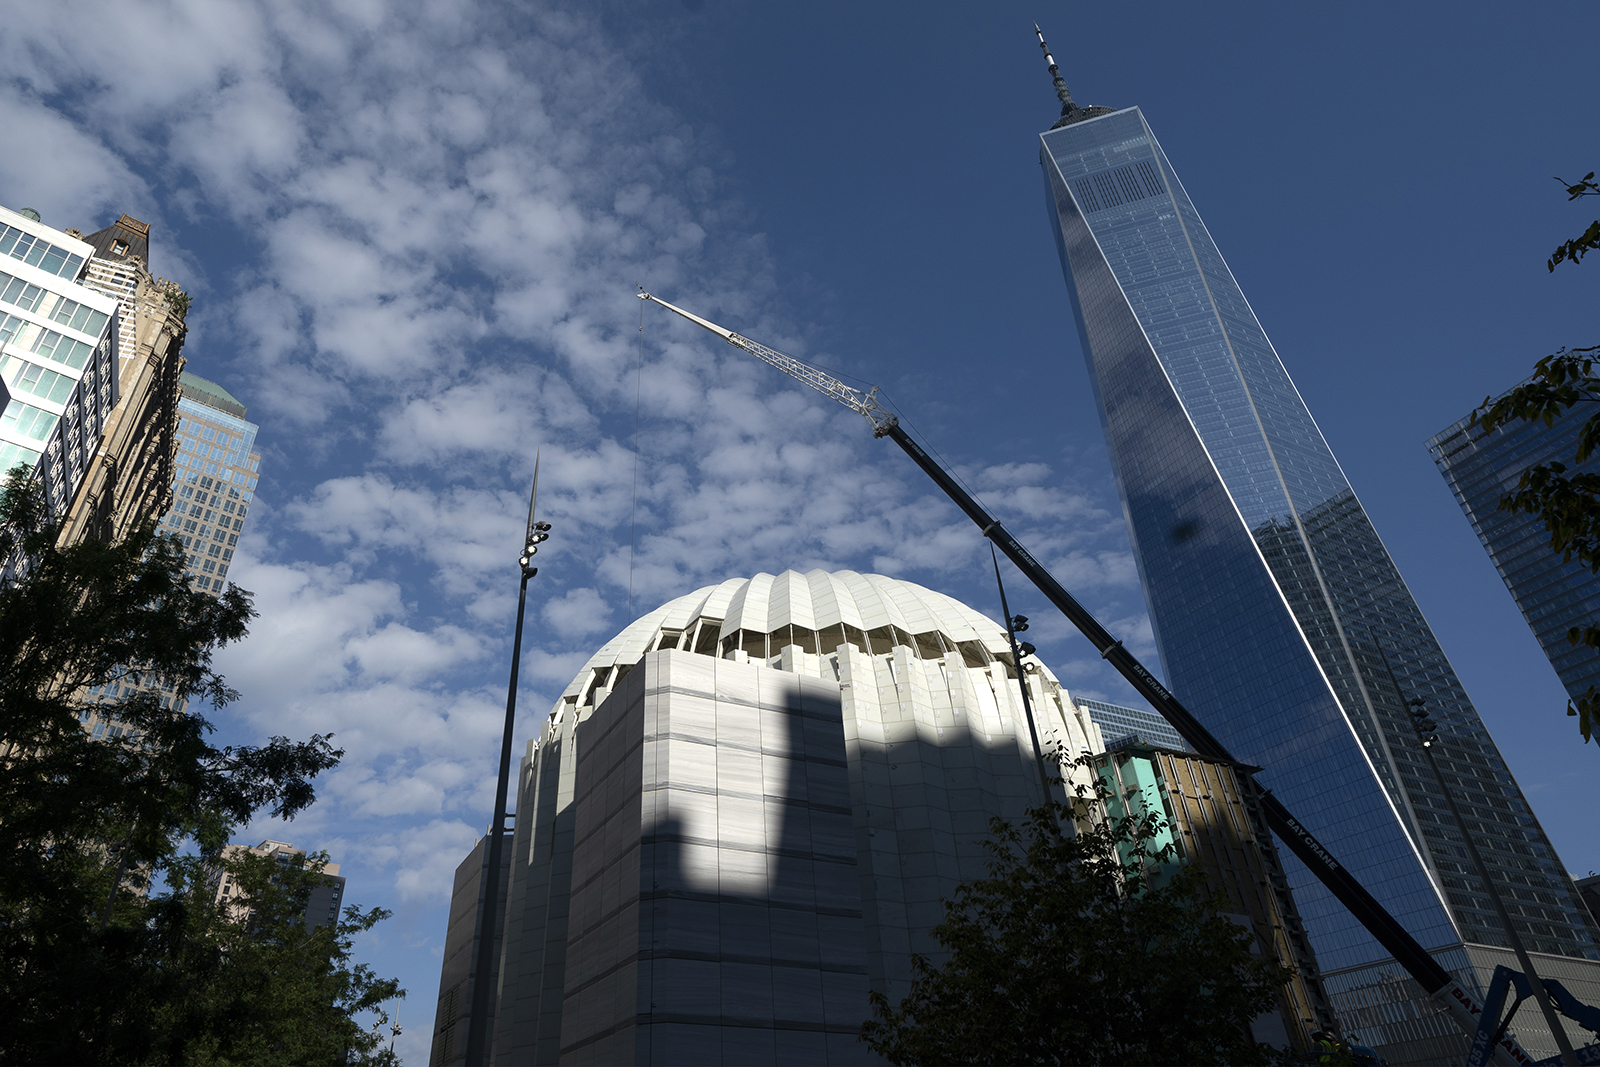 St. Nicholas Greek Orthodox Church and National Shrine, center, nears completion, Wednesday, Sept. 8, 2021, at the World Trade Center in New York.  The construction of the only place of worship destroyed during the attacks of September 11, 2001 is now progressing rapidly after years of delay.  (AP Photo/Mark Lennihan)